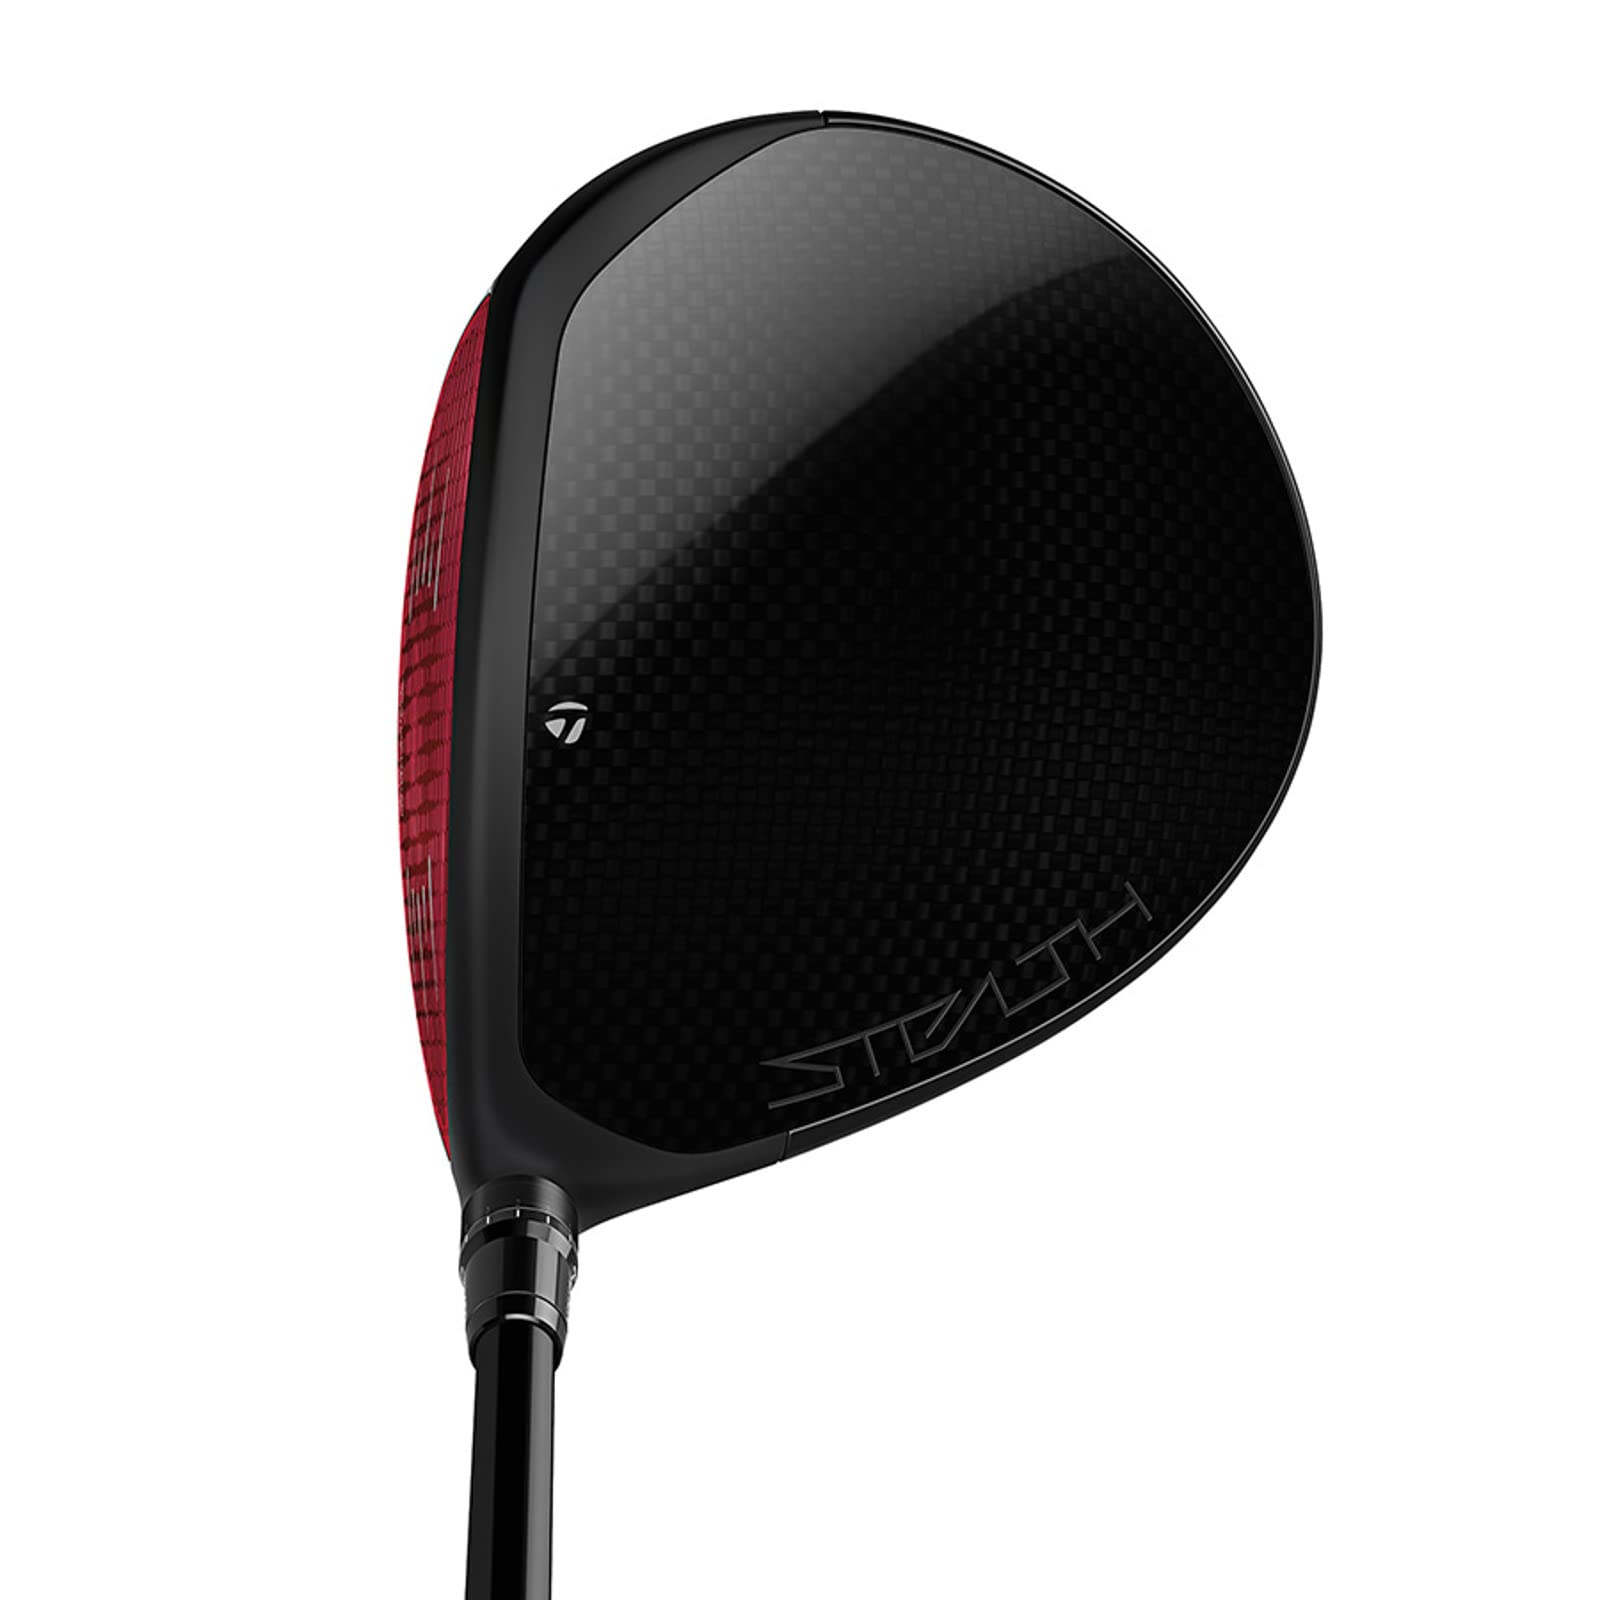 Taylormade Golf Stealth2 Plus Driver Kaili Red 10.5/Left Hand Stiff